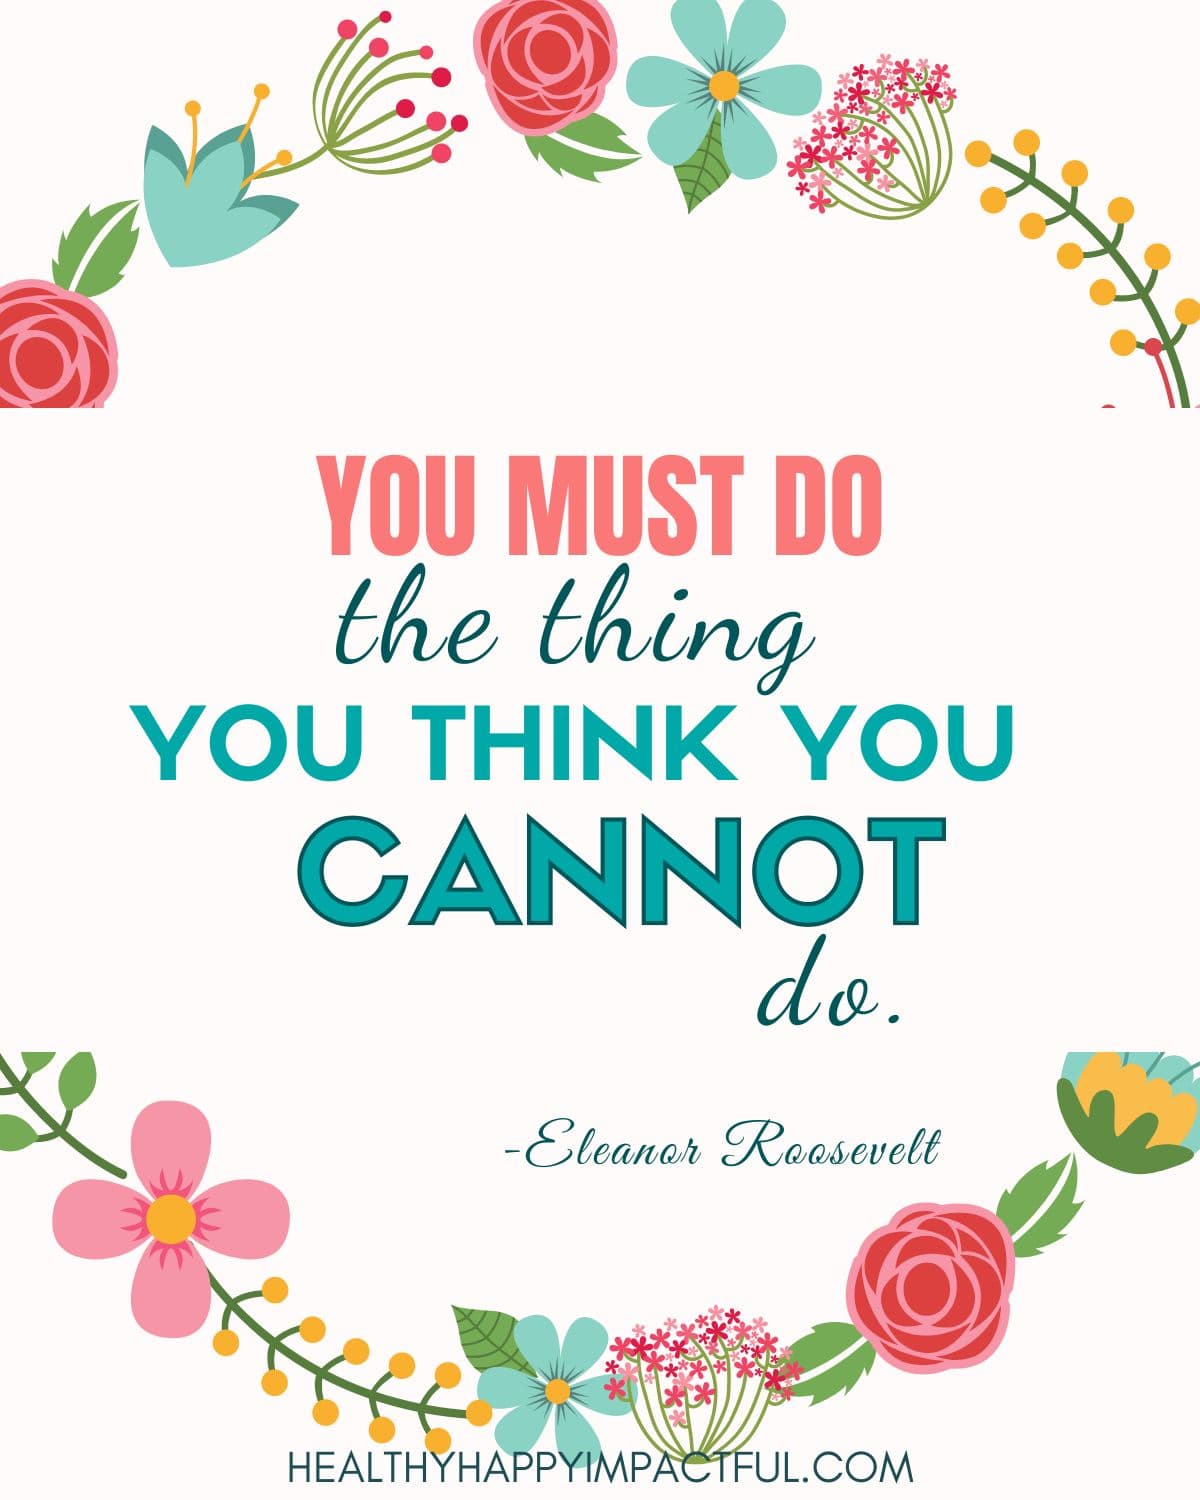 You must do the thing you think you cannot do. Eleanor Roosevelt vision board sayings and quotes